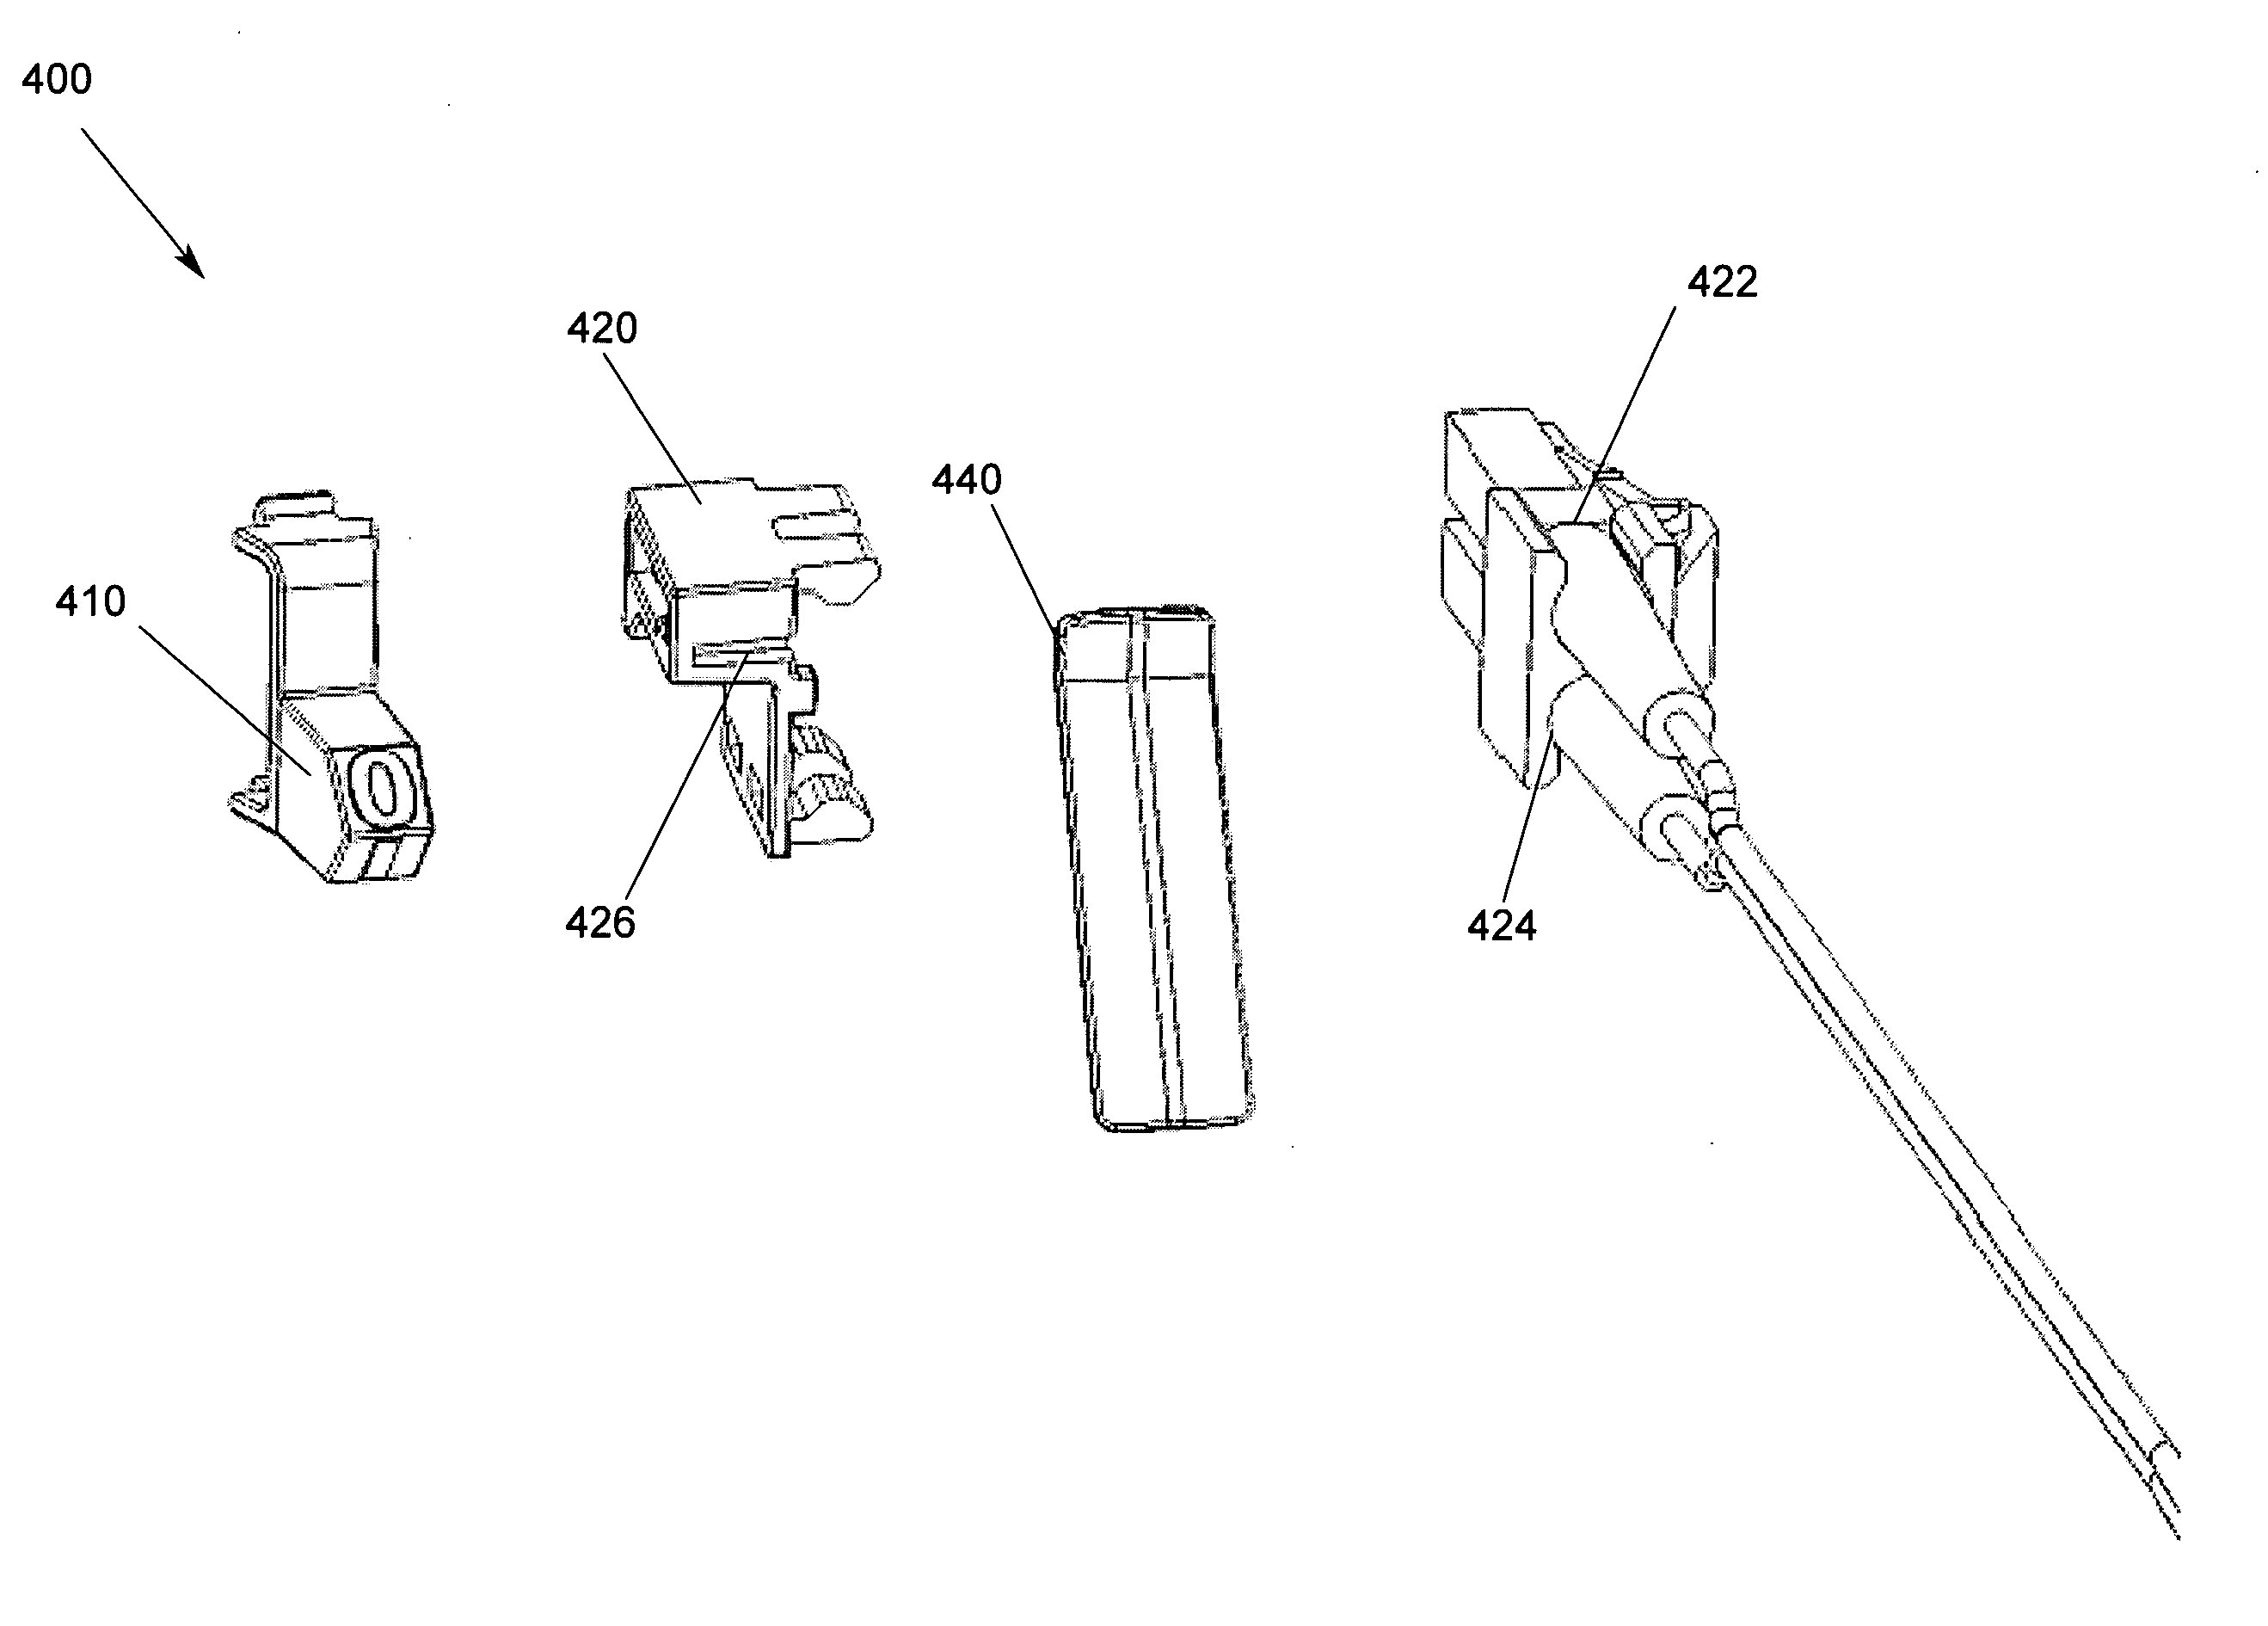 Method and apparatus for providing connector keying and identification for unidirectional fiber cables